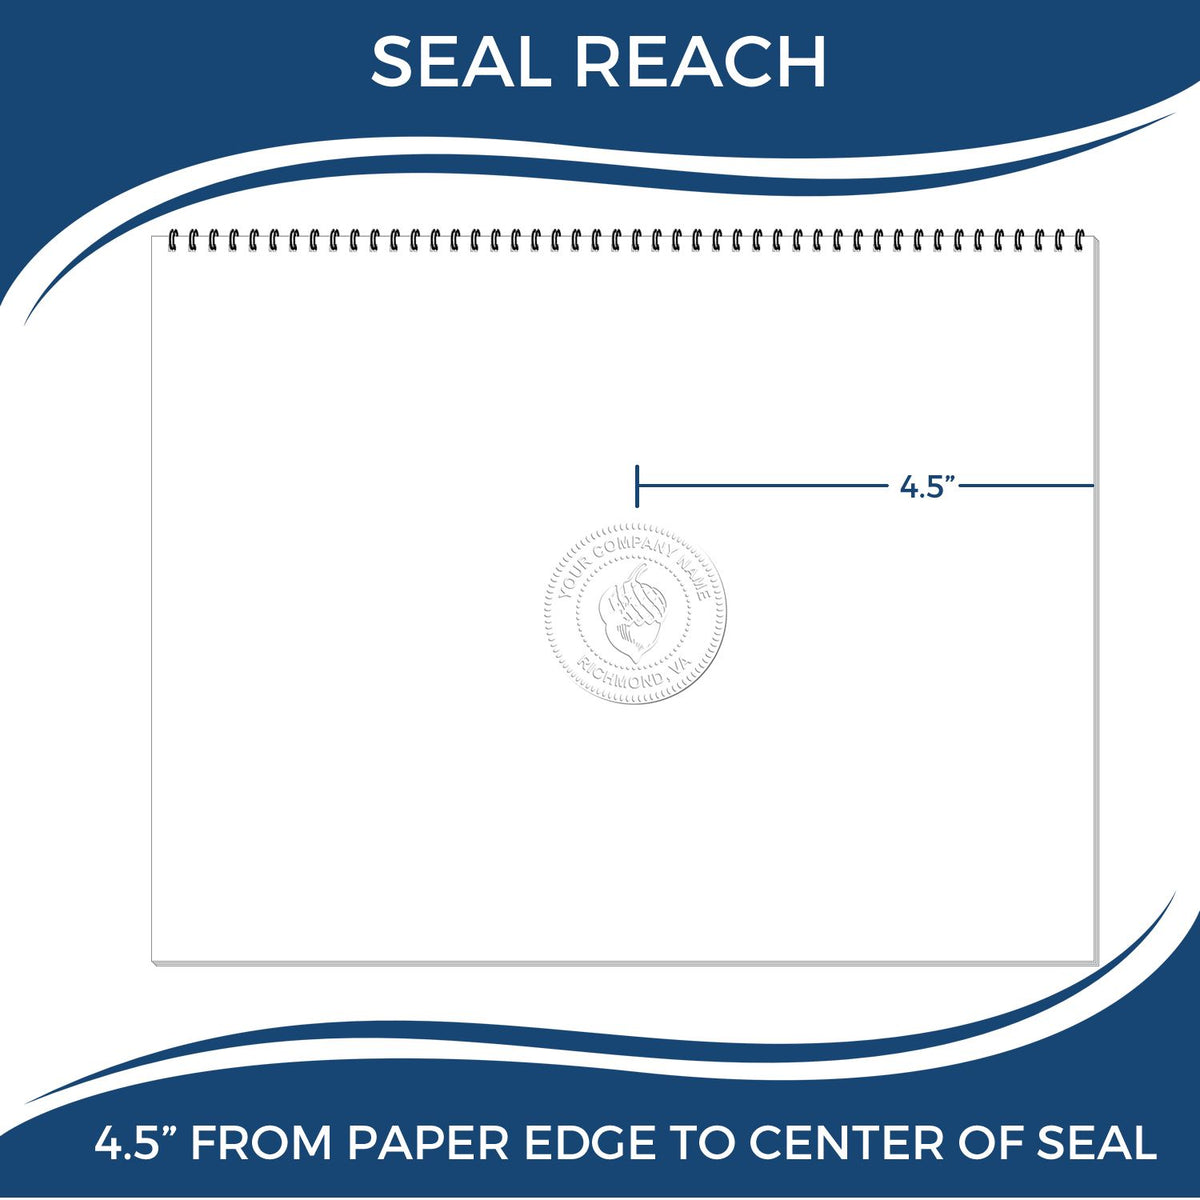 An infographic showing the seal reach which is represented by a ruler and a miniature seal image of the State of Vermont Extended Long Reach Engineer Seal